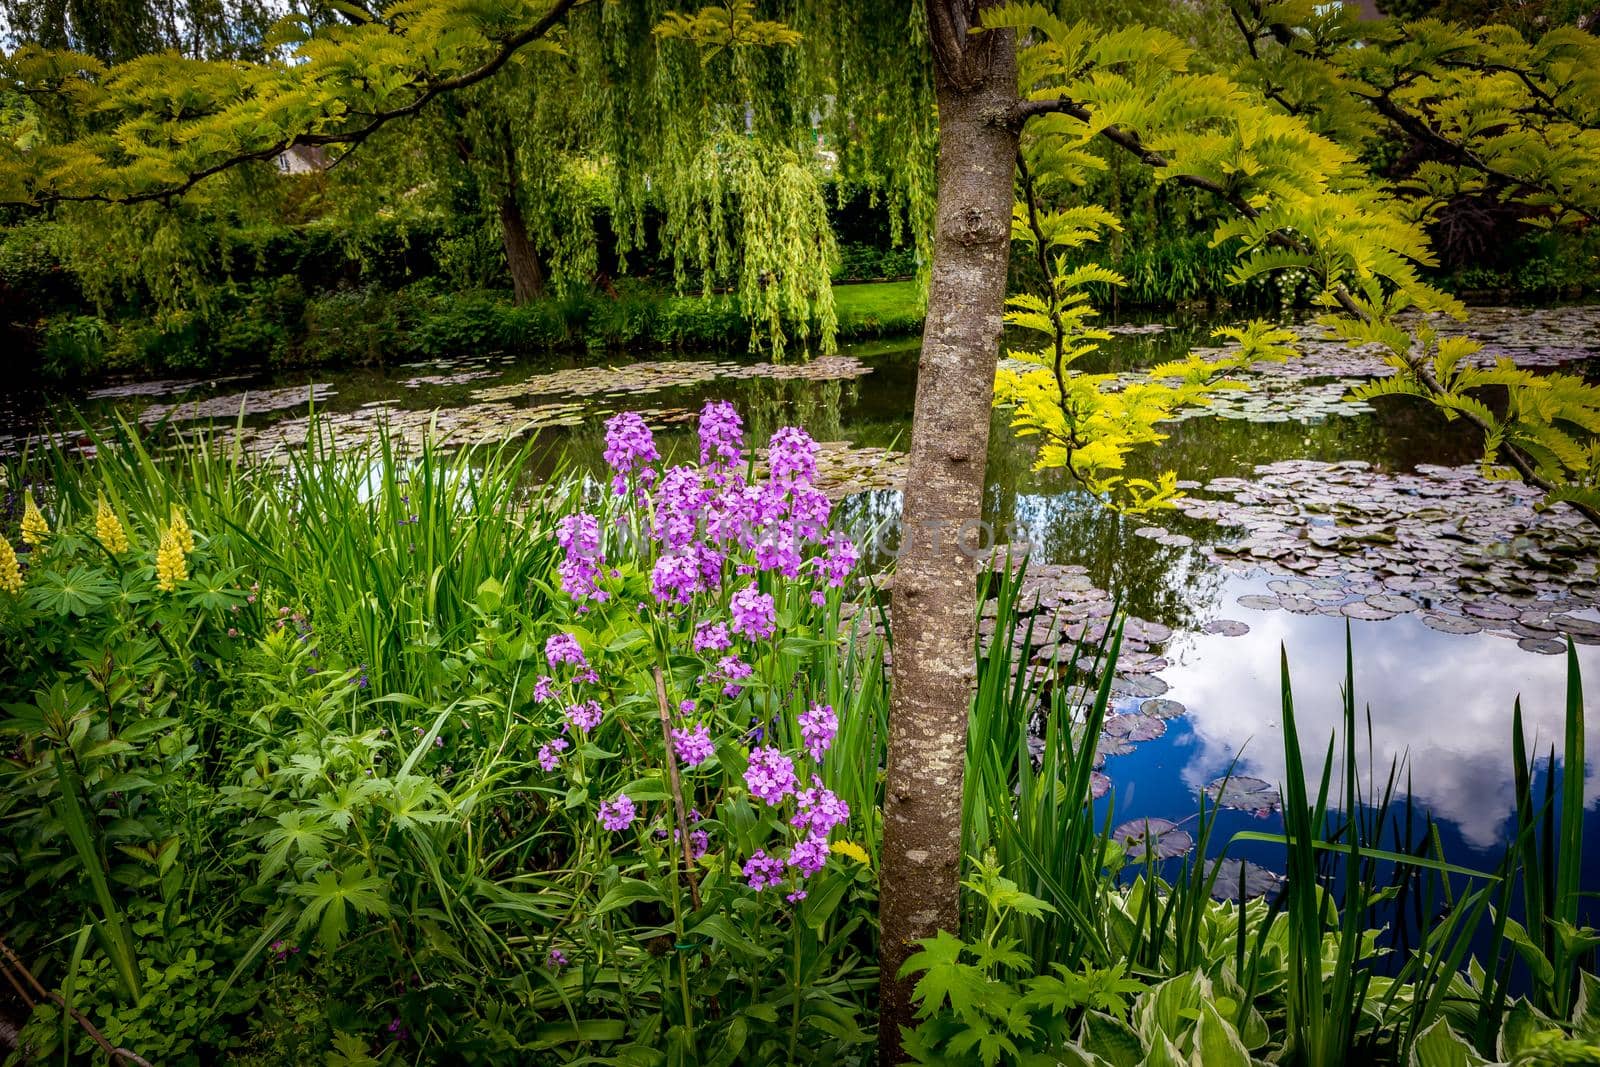 Pond, trees, and waterlilies in a french garden by photogolfer